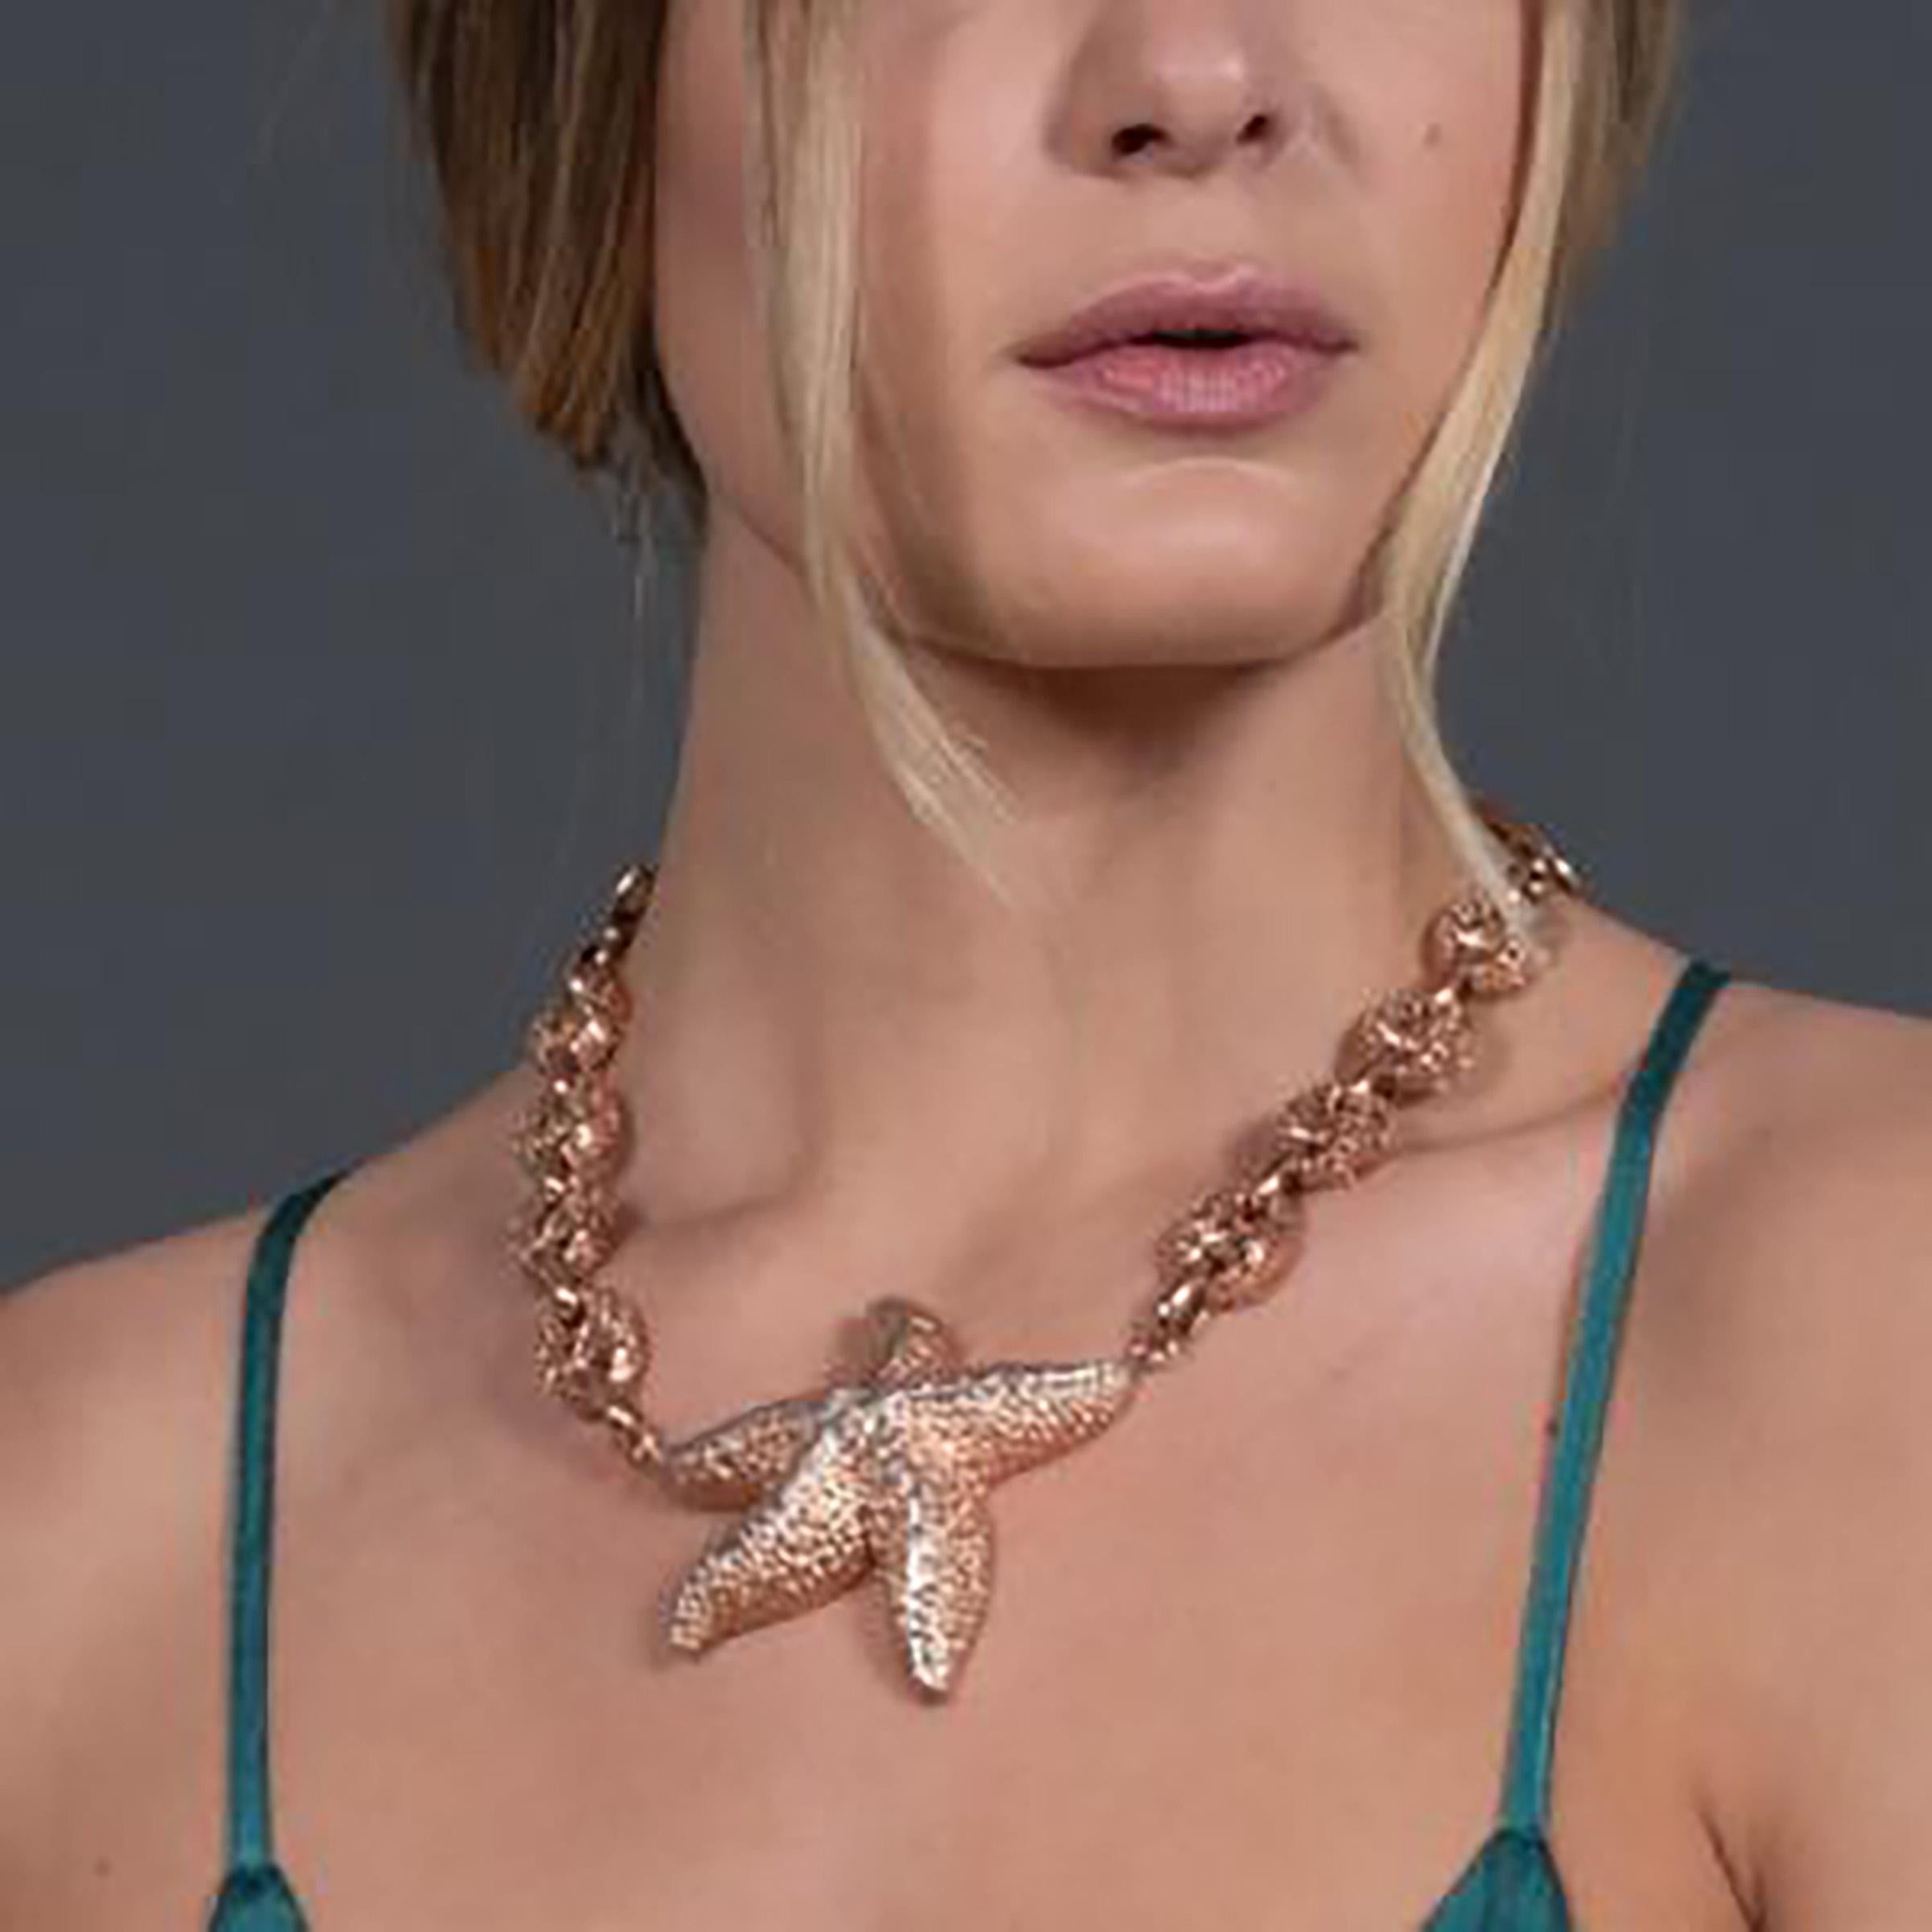 The Under the Sea Necklace - A Love Affair Collection.
Through frequent trips, A Love Affair explores the realm that comes into focus through a scuba diver’s mask. The Under the Sea Necklace captures the nature of that otherworldly destination. The